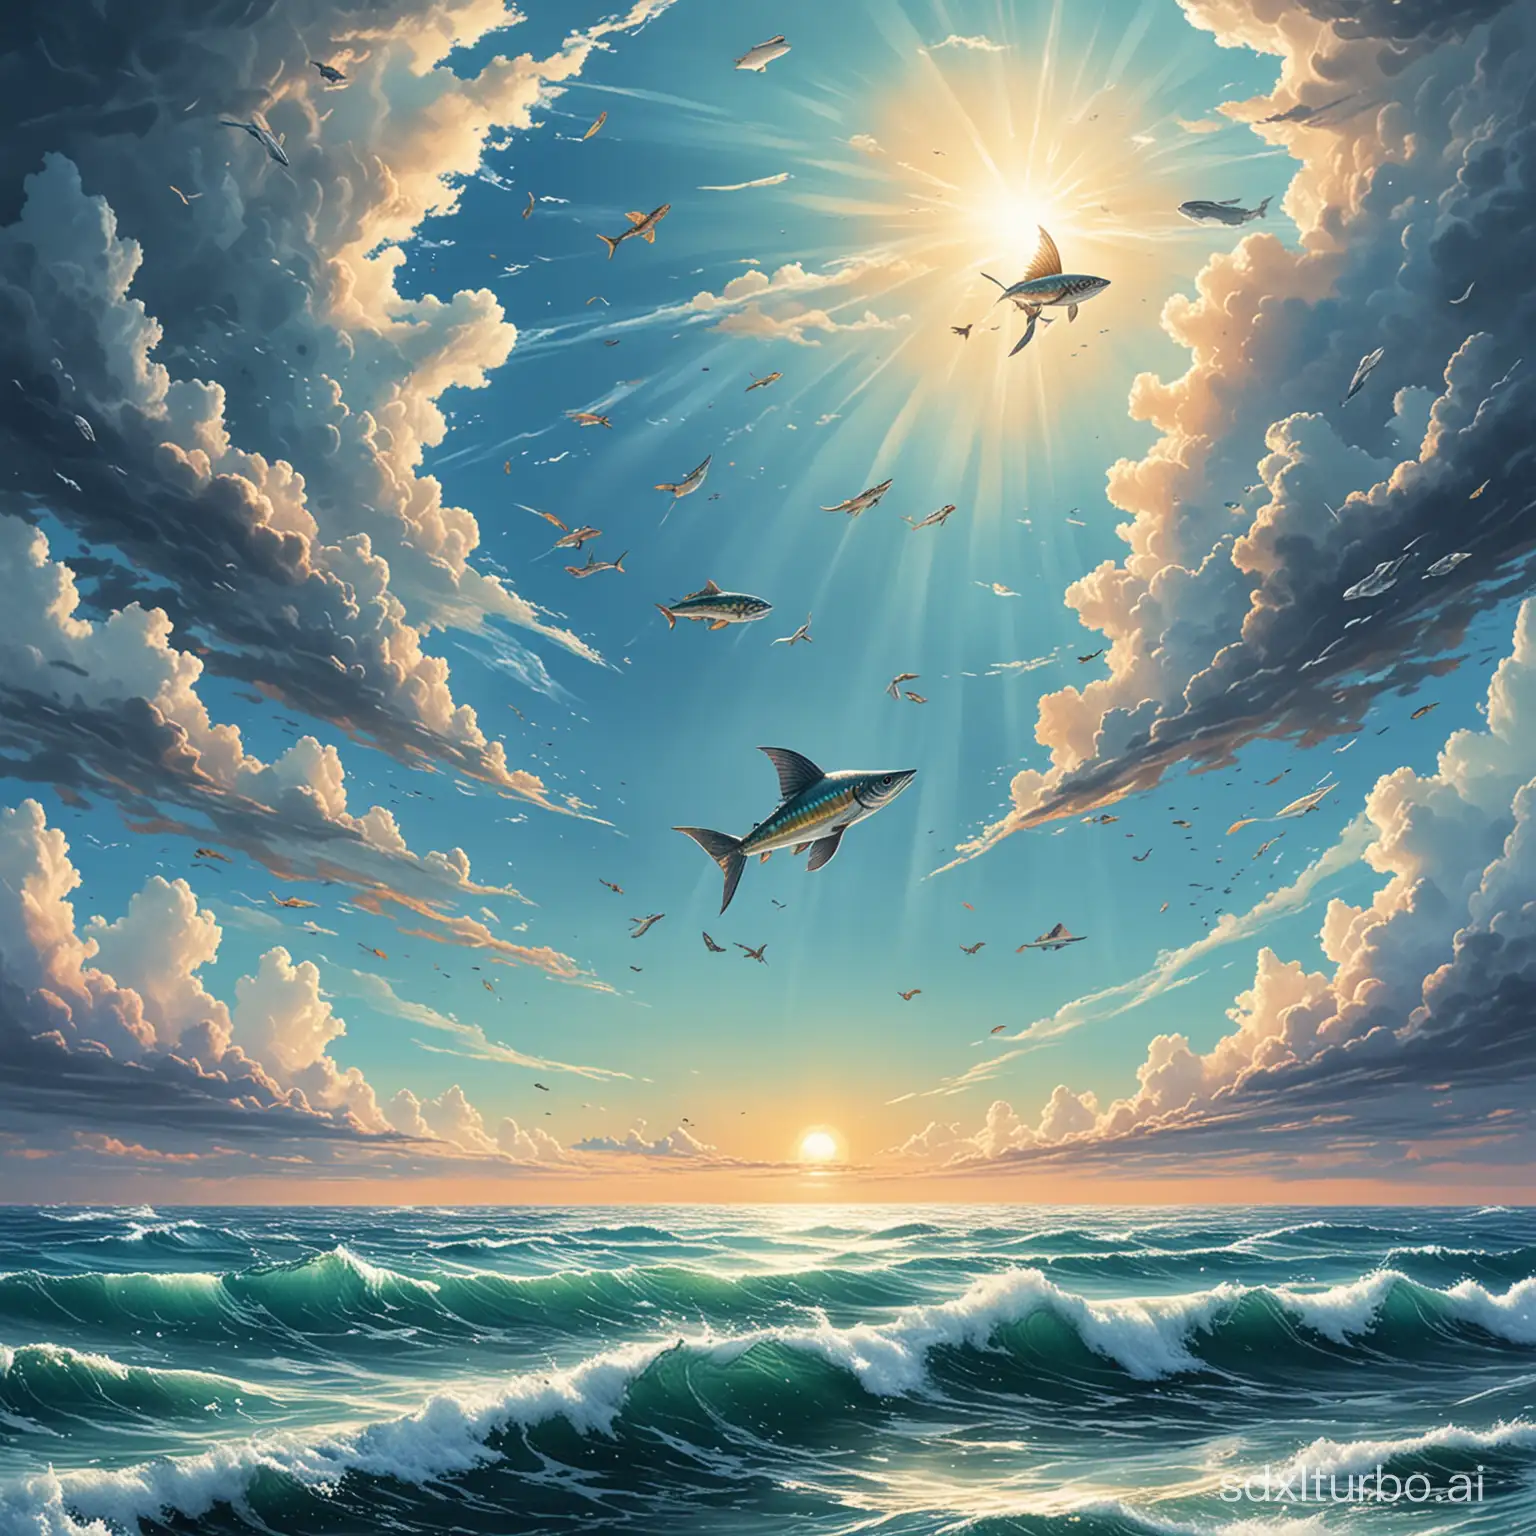 ocean in the sky with flying fish